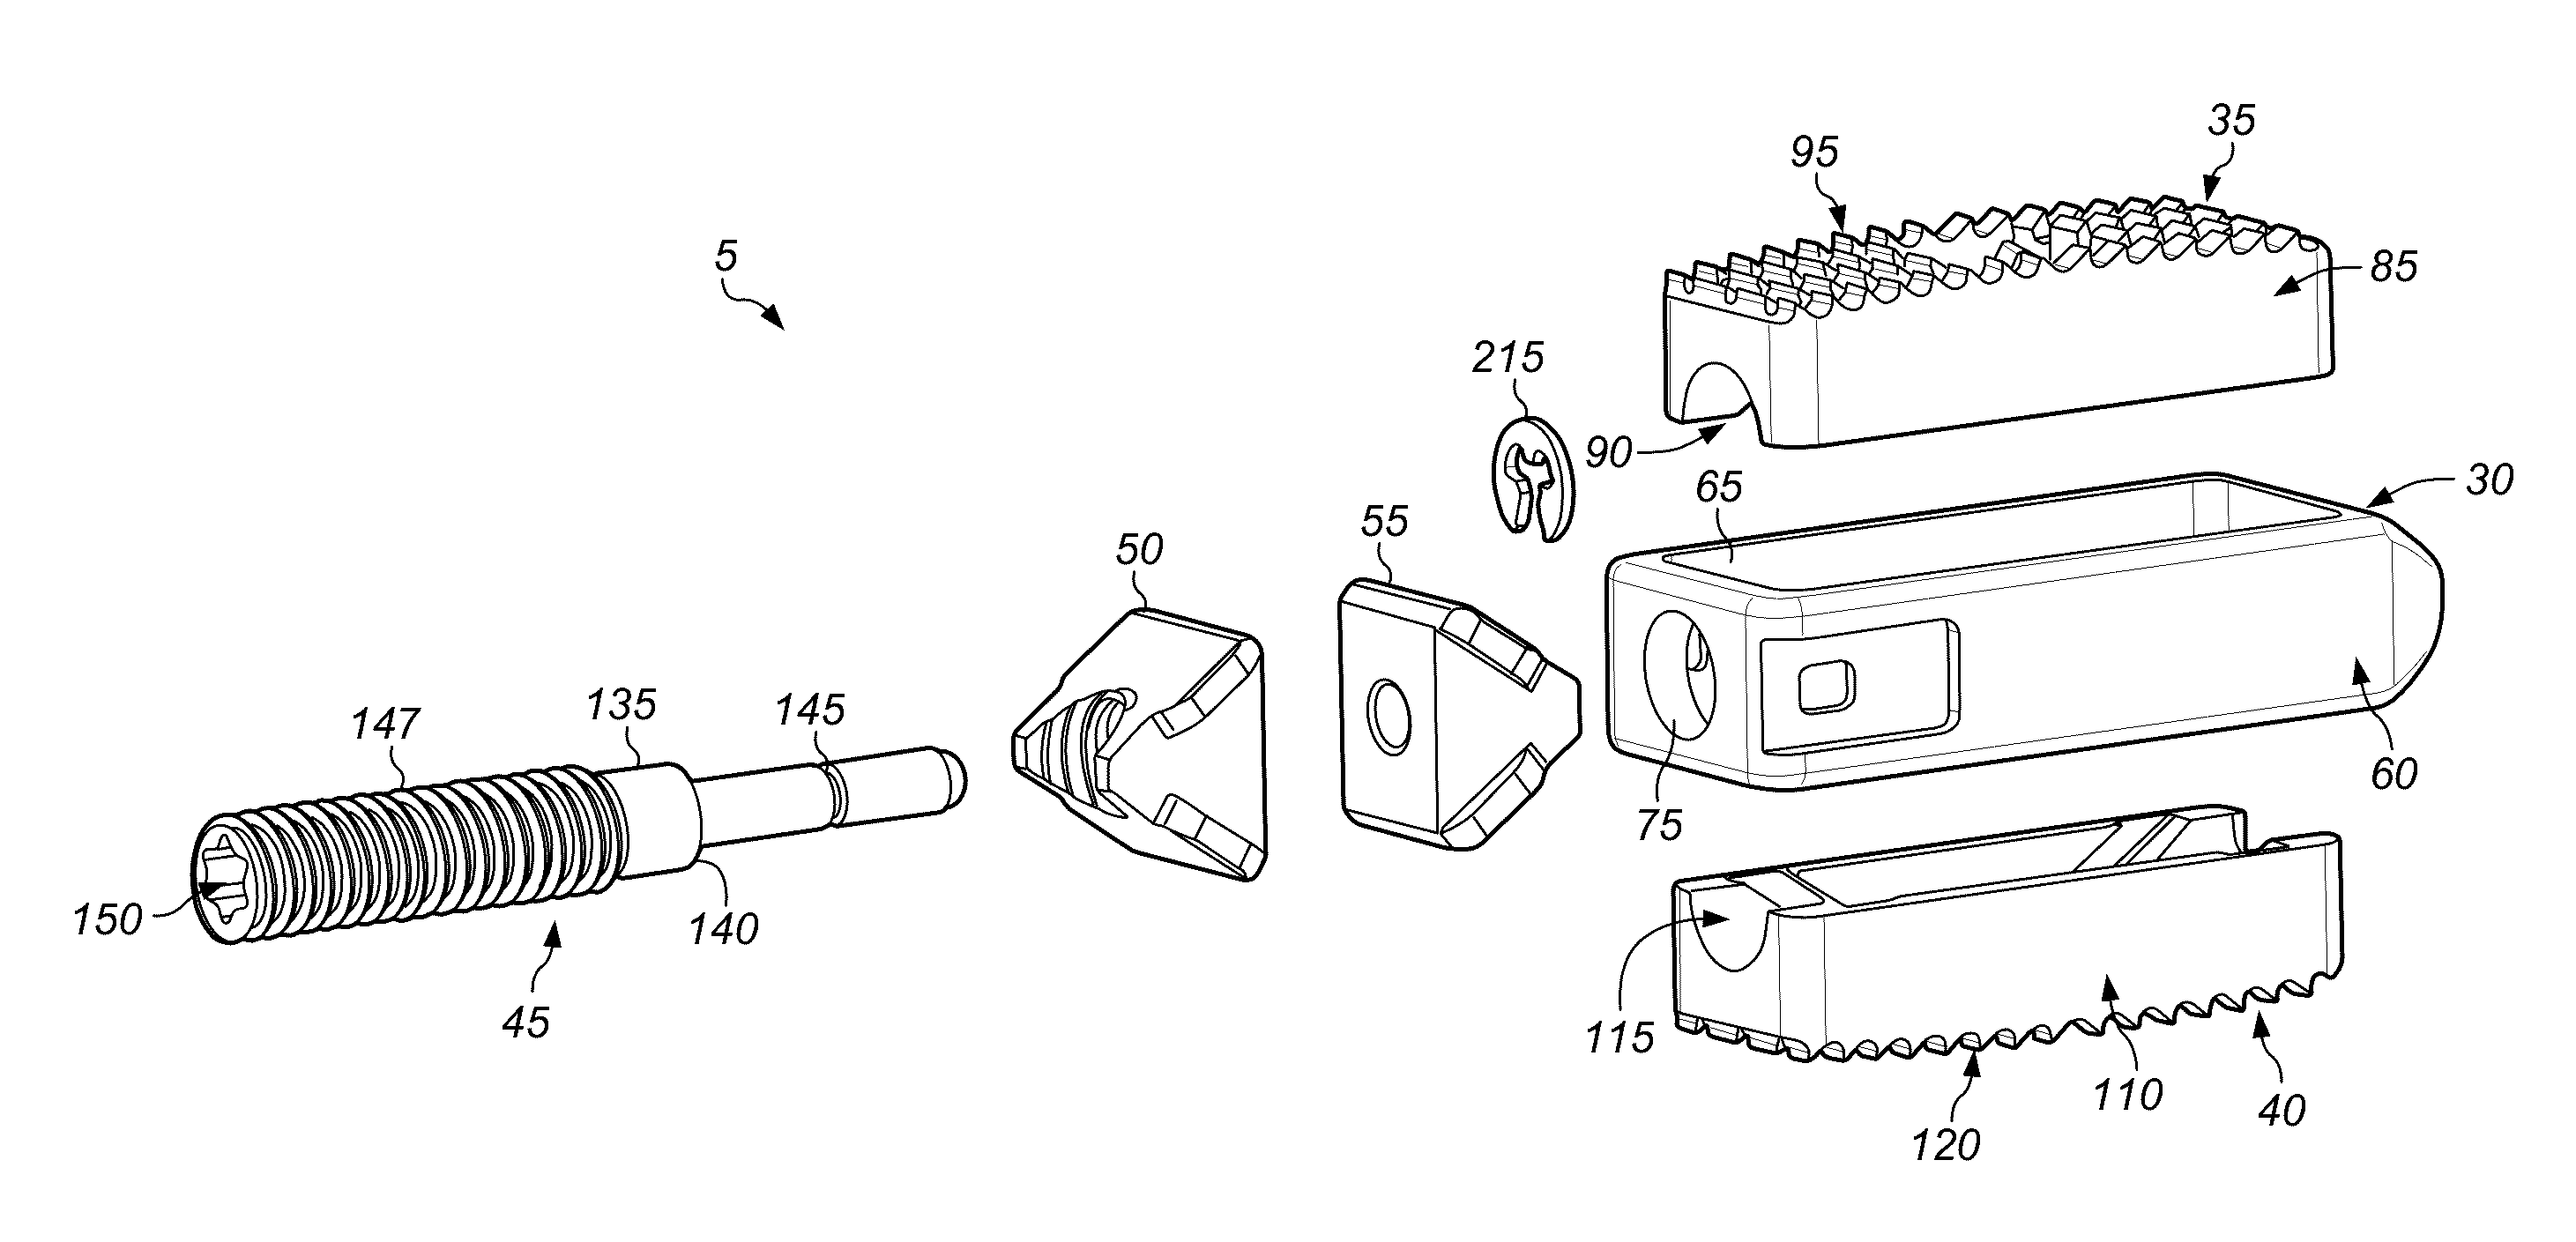 Expandable fusion device for positioning between adjacent vertebral bodies